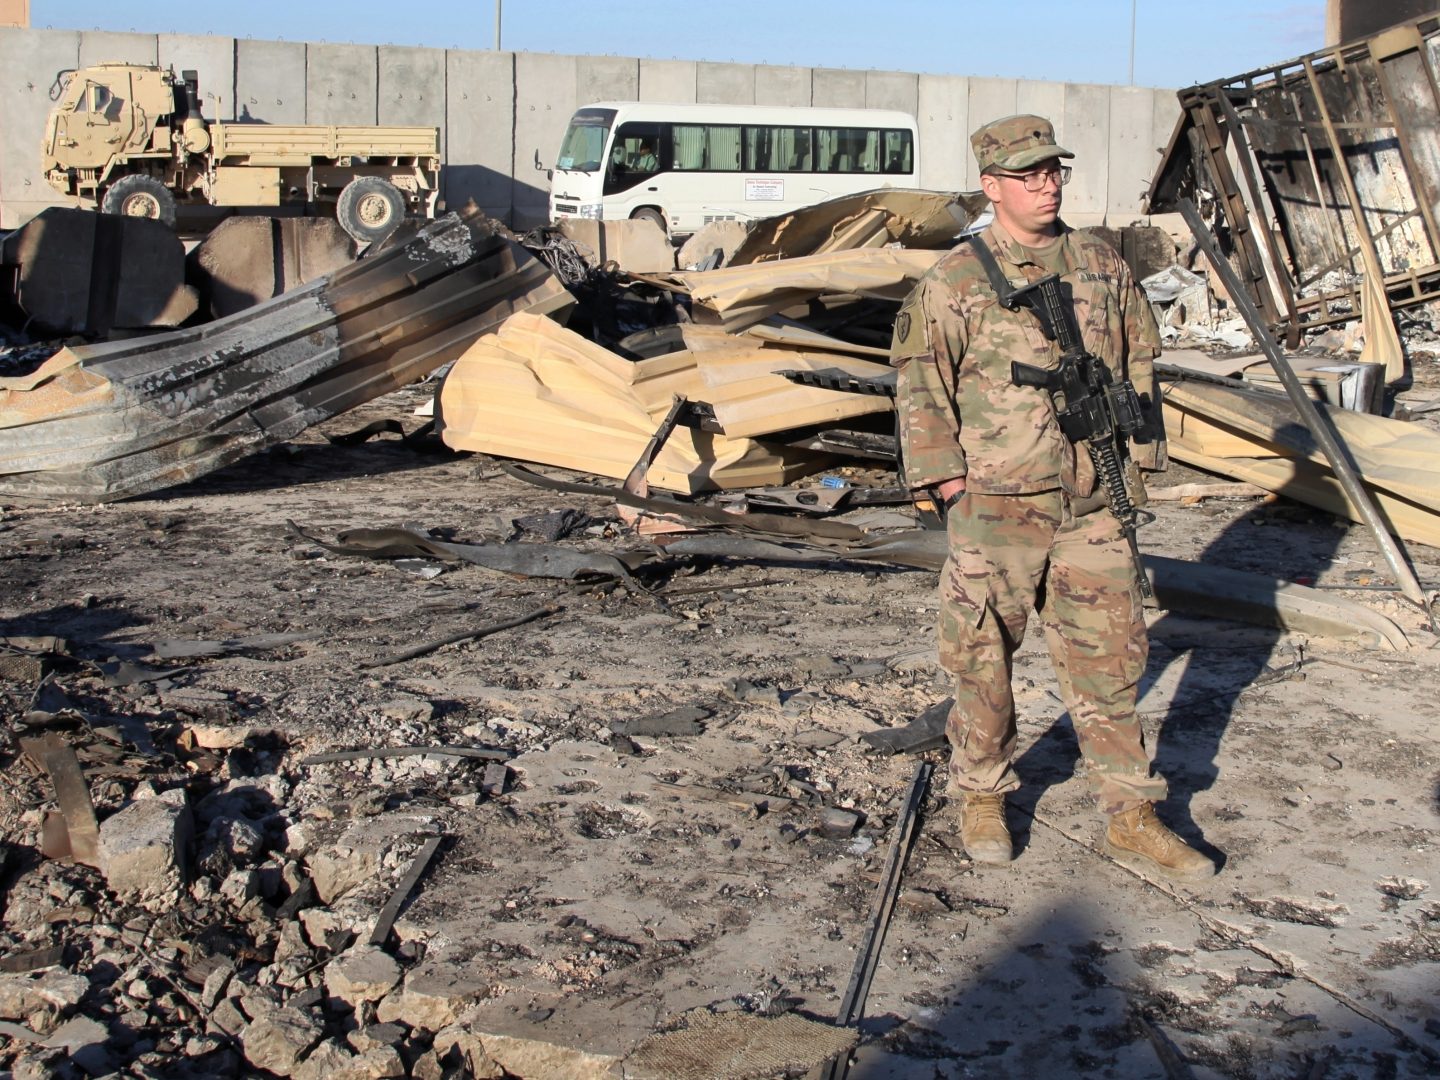 In this Monday, Jan. 13, 2020 photo, A U.S. Soldier stands at the spot hit by Iranian bombing at Ain al-Asad air base, in Anbar, Iraq. Ain al-Asad air base was struck by a barrage of Iranian missiles on Wednesday, in retaliation for the U.S. drone strike that killed atop Iranian commander, Gen. Qassem Soleimani, whose killing raised fears of a wider war in the Middle East.